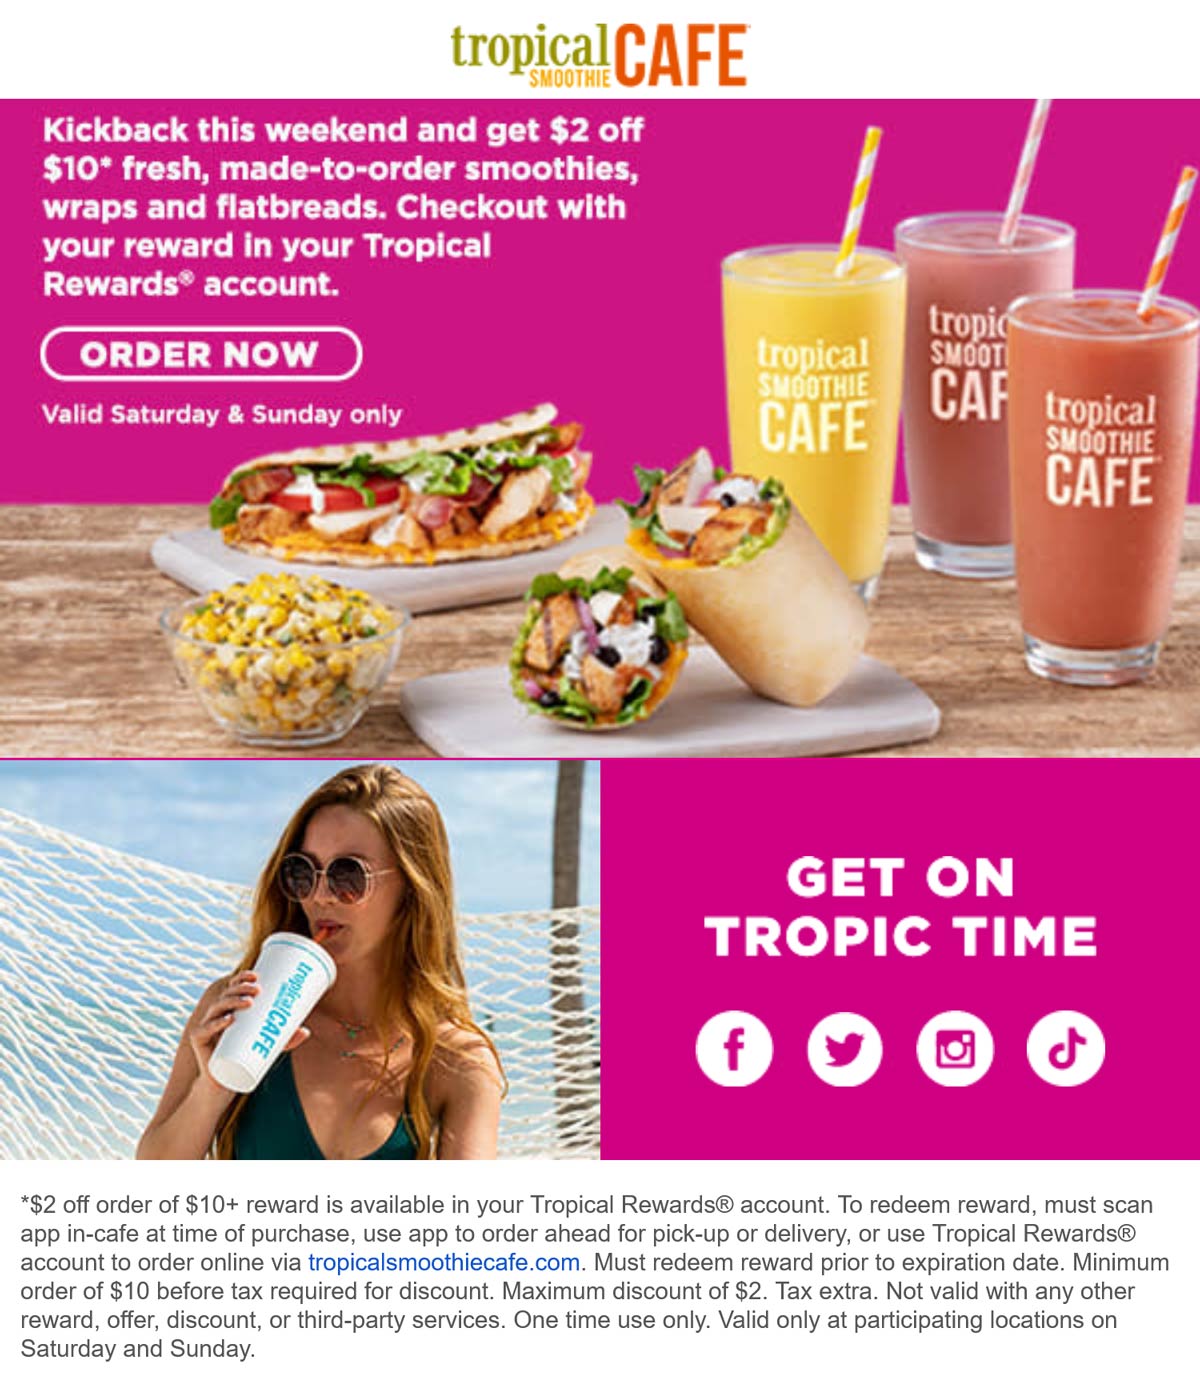 Tropical Smoothie Cafe coupons & promo code for [December 2022]